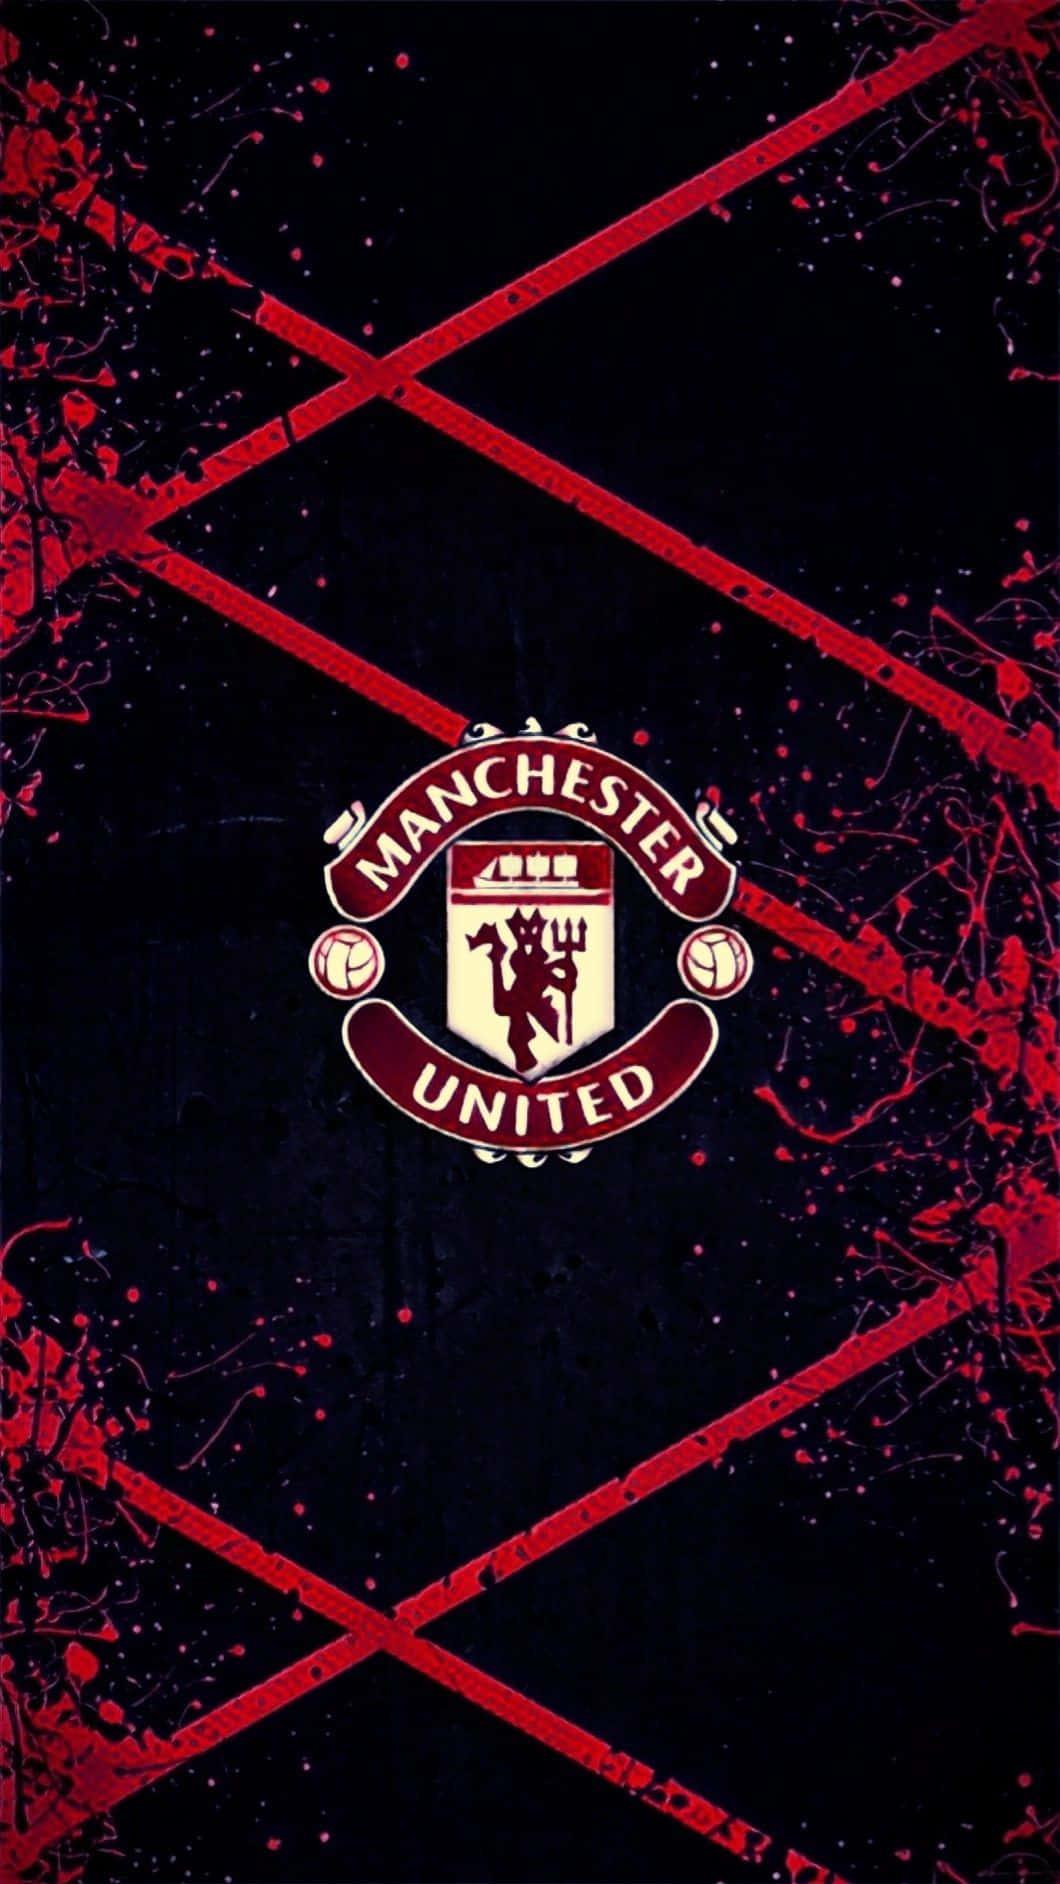 Brighten Your Day With Manchester United Football Club